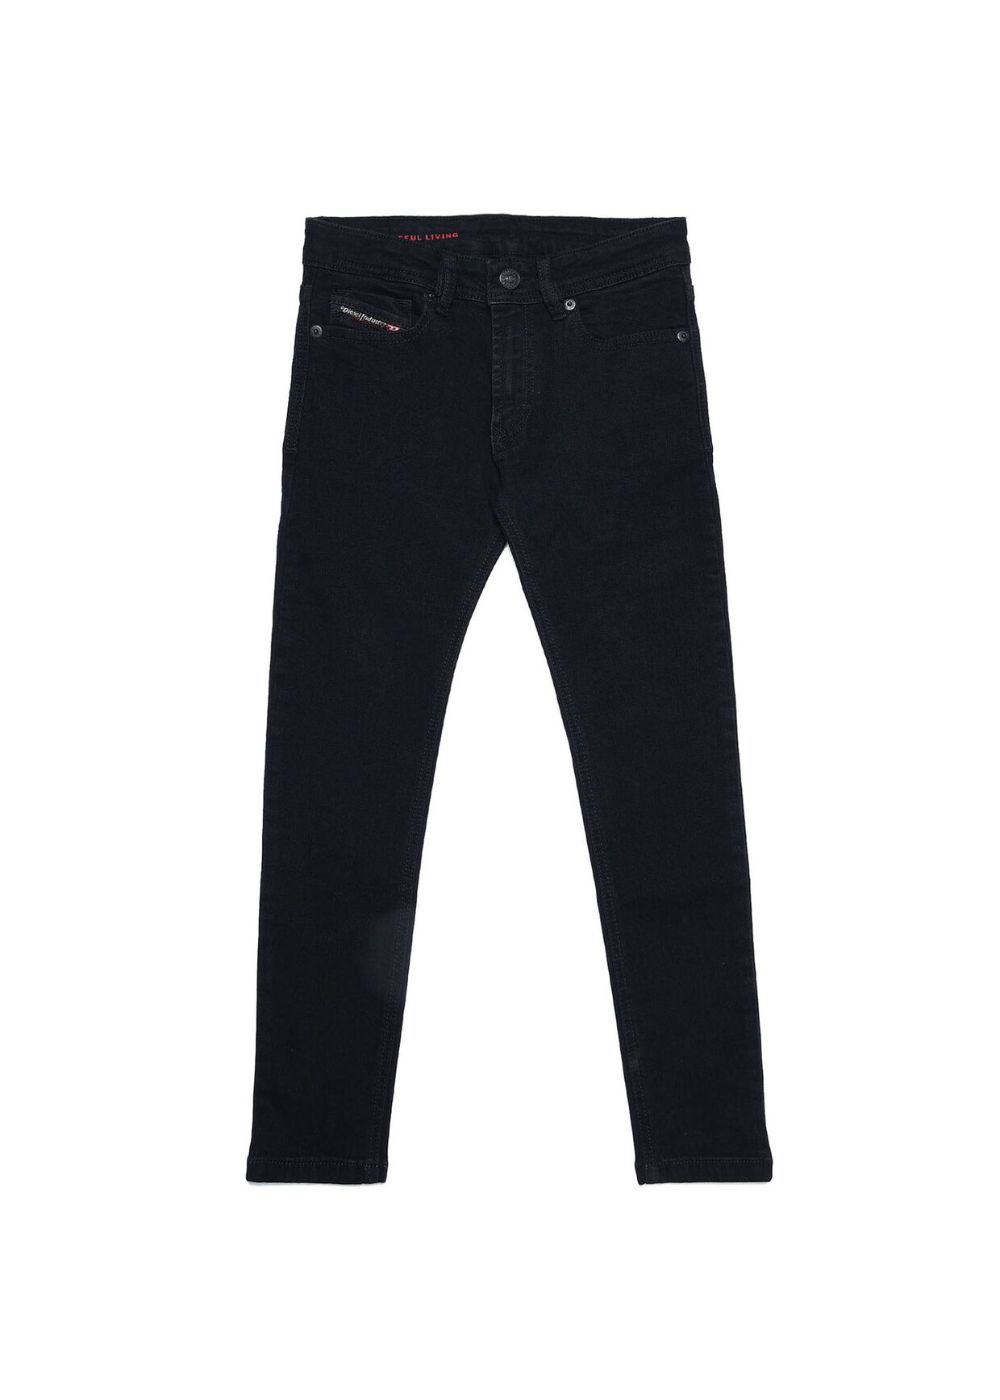 Featured image for “Diesel Jeans Nero Skinny”